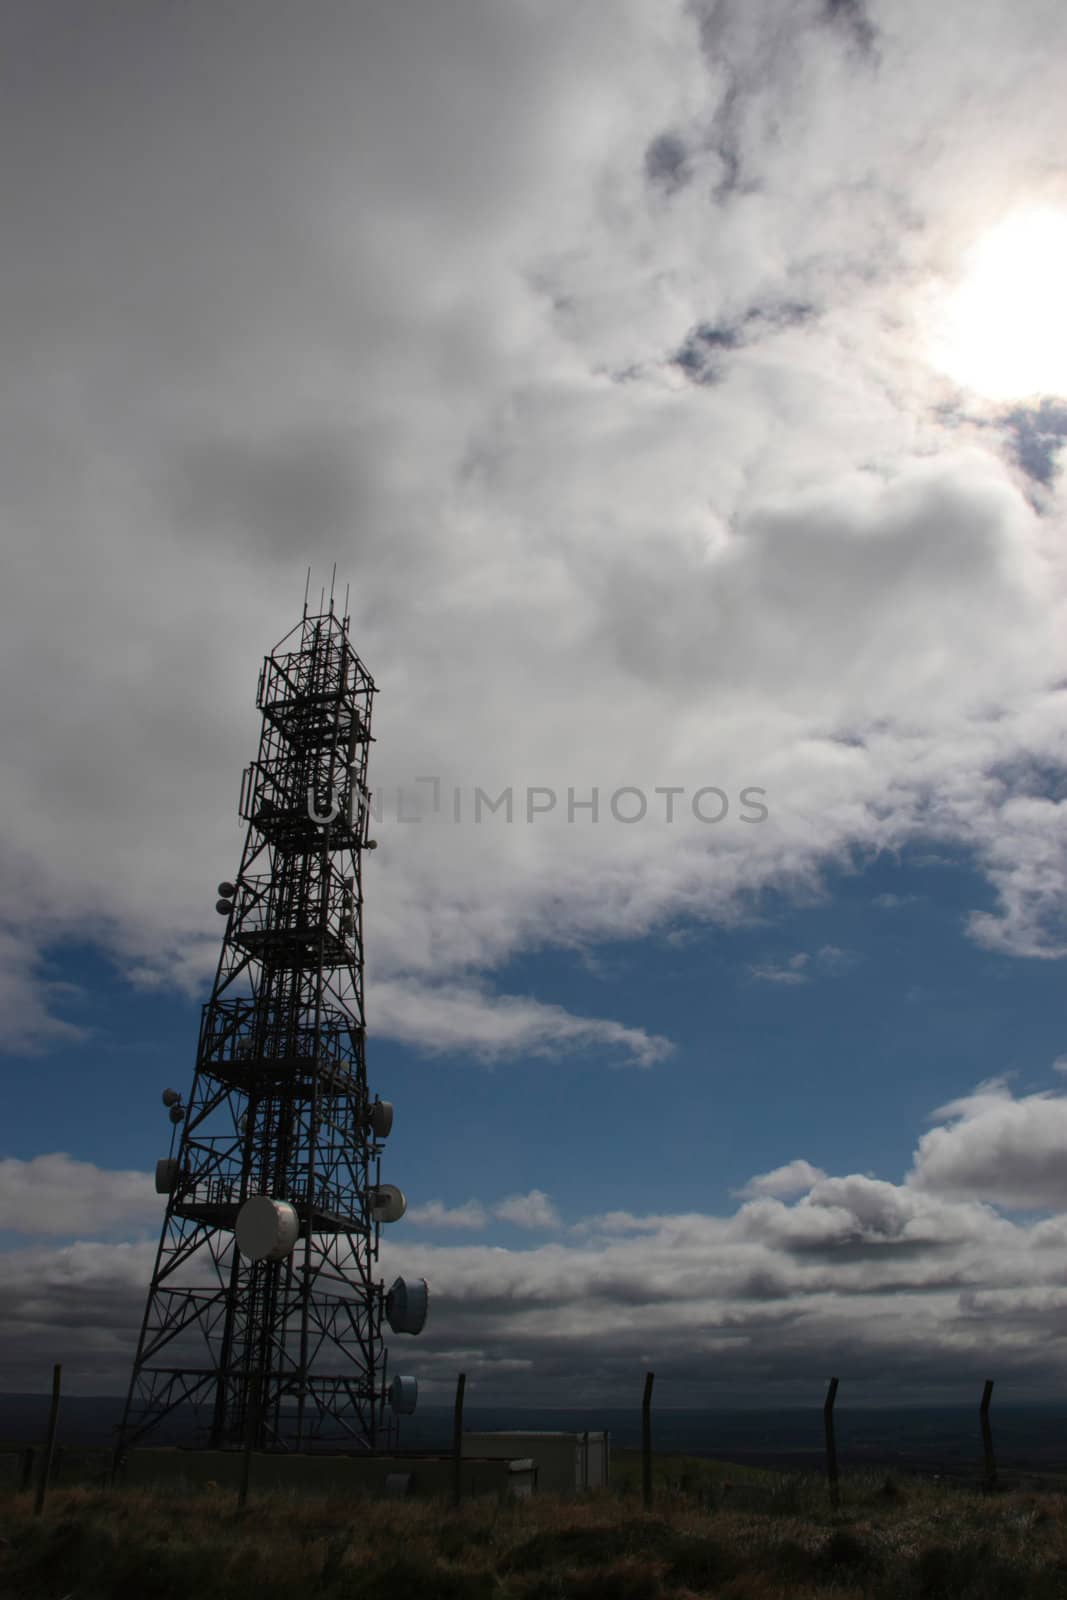 communication masts and dishes on top of a hill